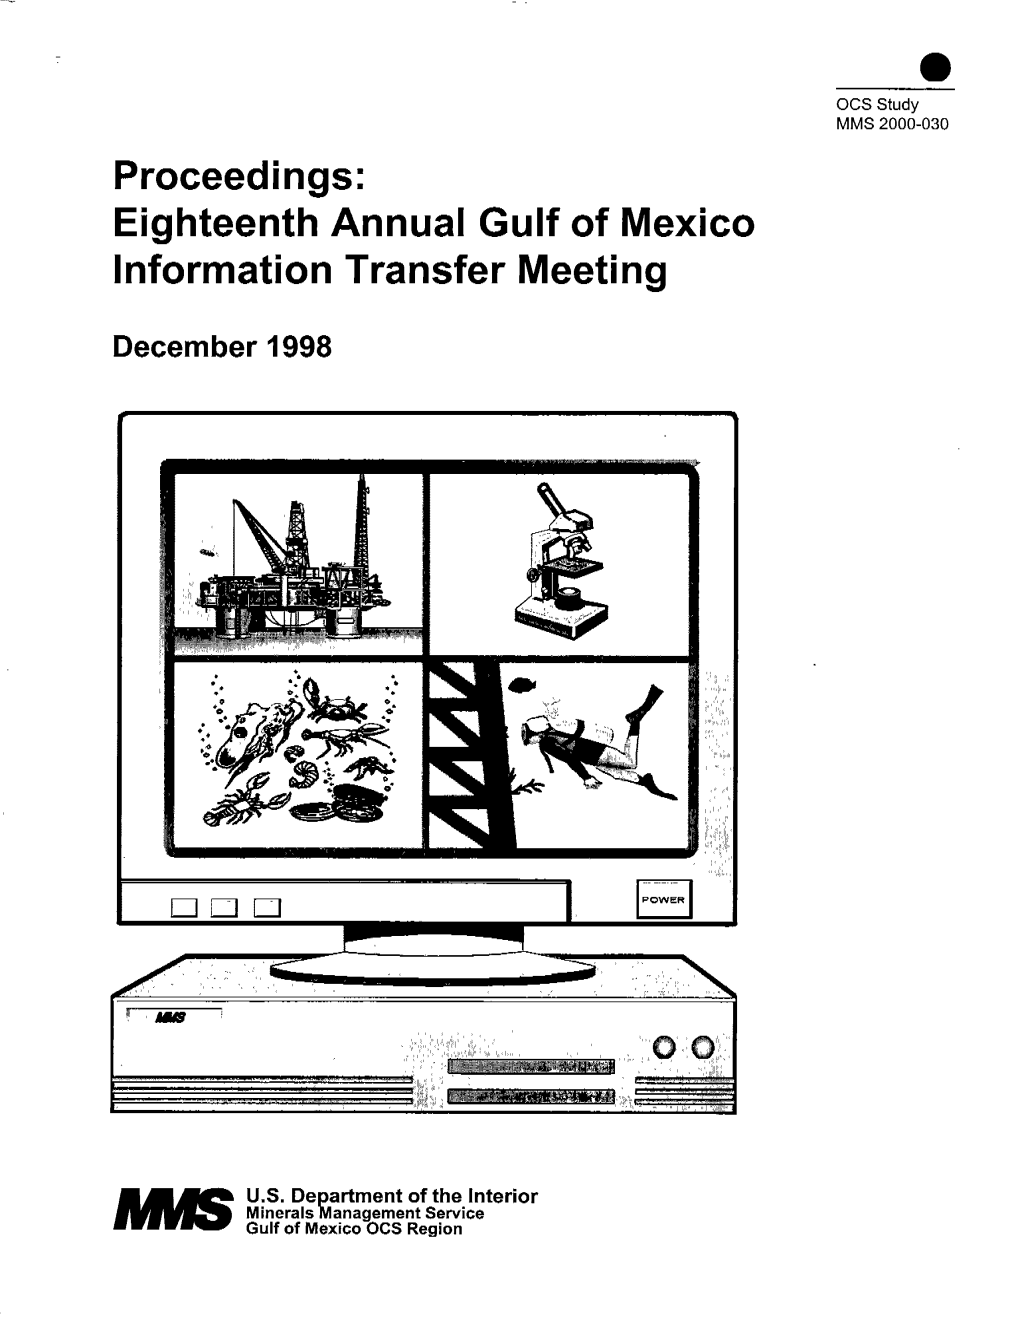 Eighteenth Annual Gulf of Mexico Information Transfer Meeting